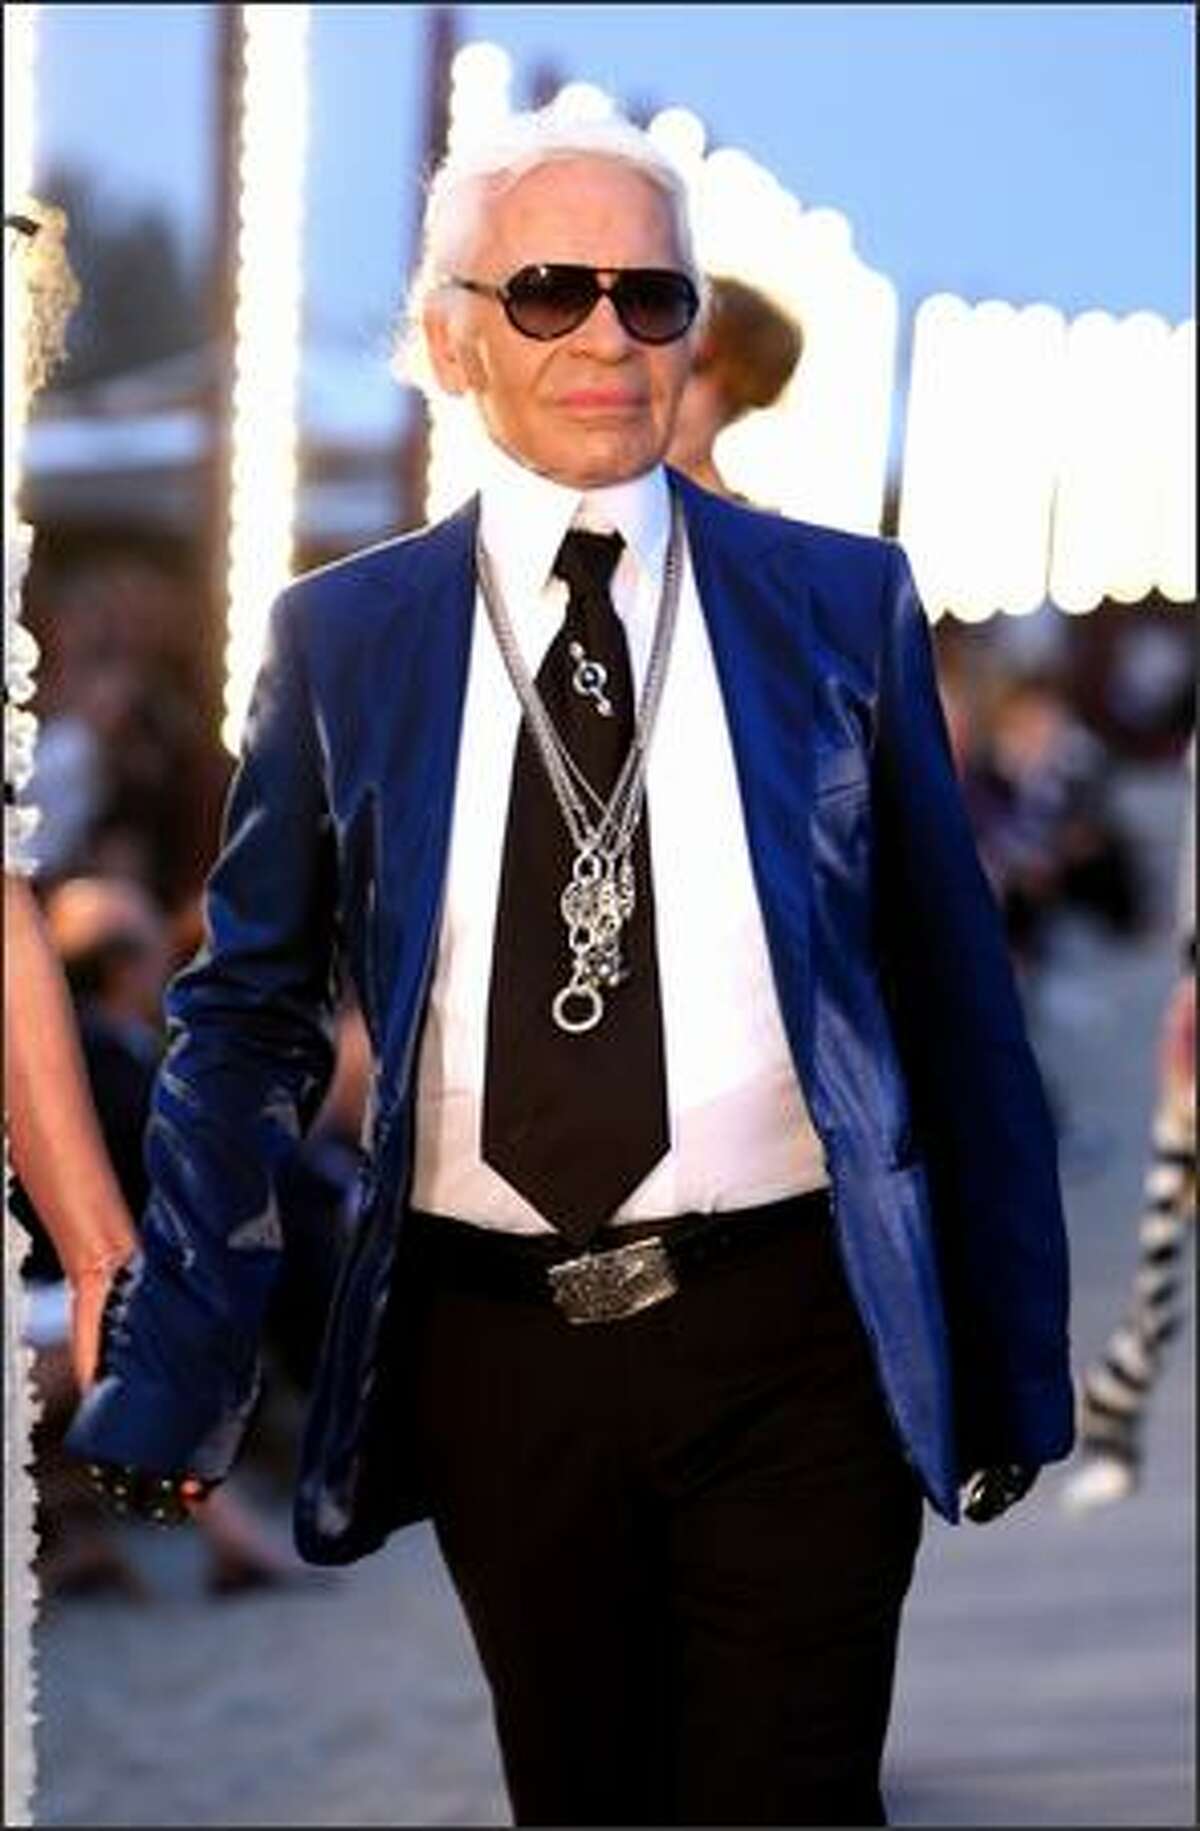 Designer Karl Lagerfeld walks the runway during the Chanel Cruise 2010 Fashion Show in Venice, Italy, on Thursday, May 14, 2009. Lagerfeld is the head designer at the venerable French couture house.